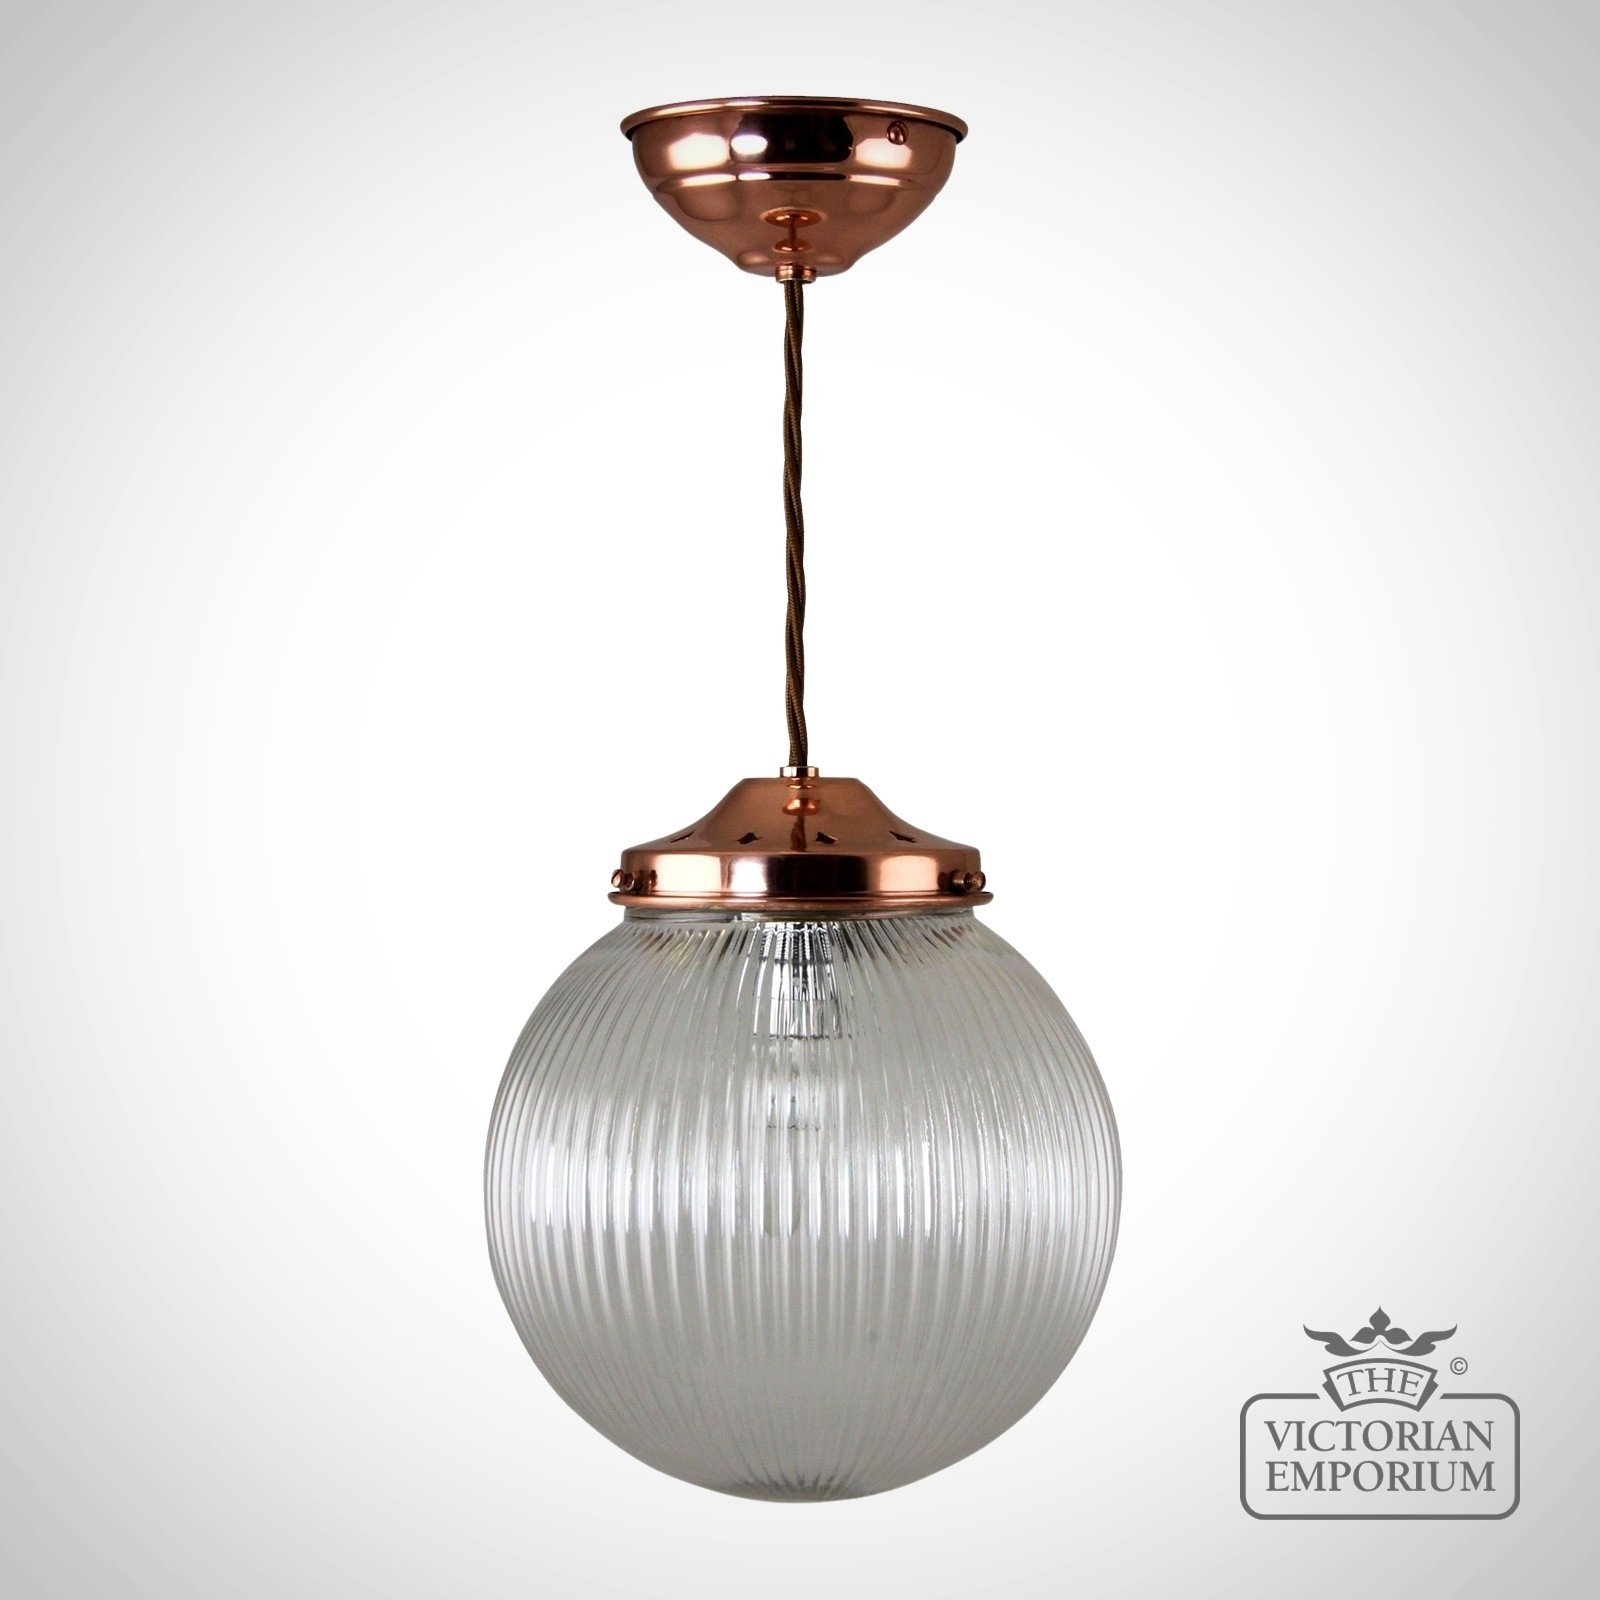 Reeded Glass Globe Ceiling Light With Polished Copper Metalwork